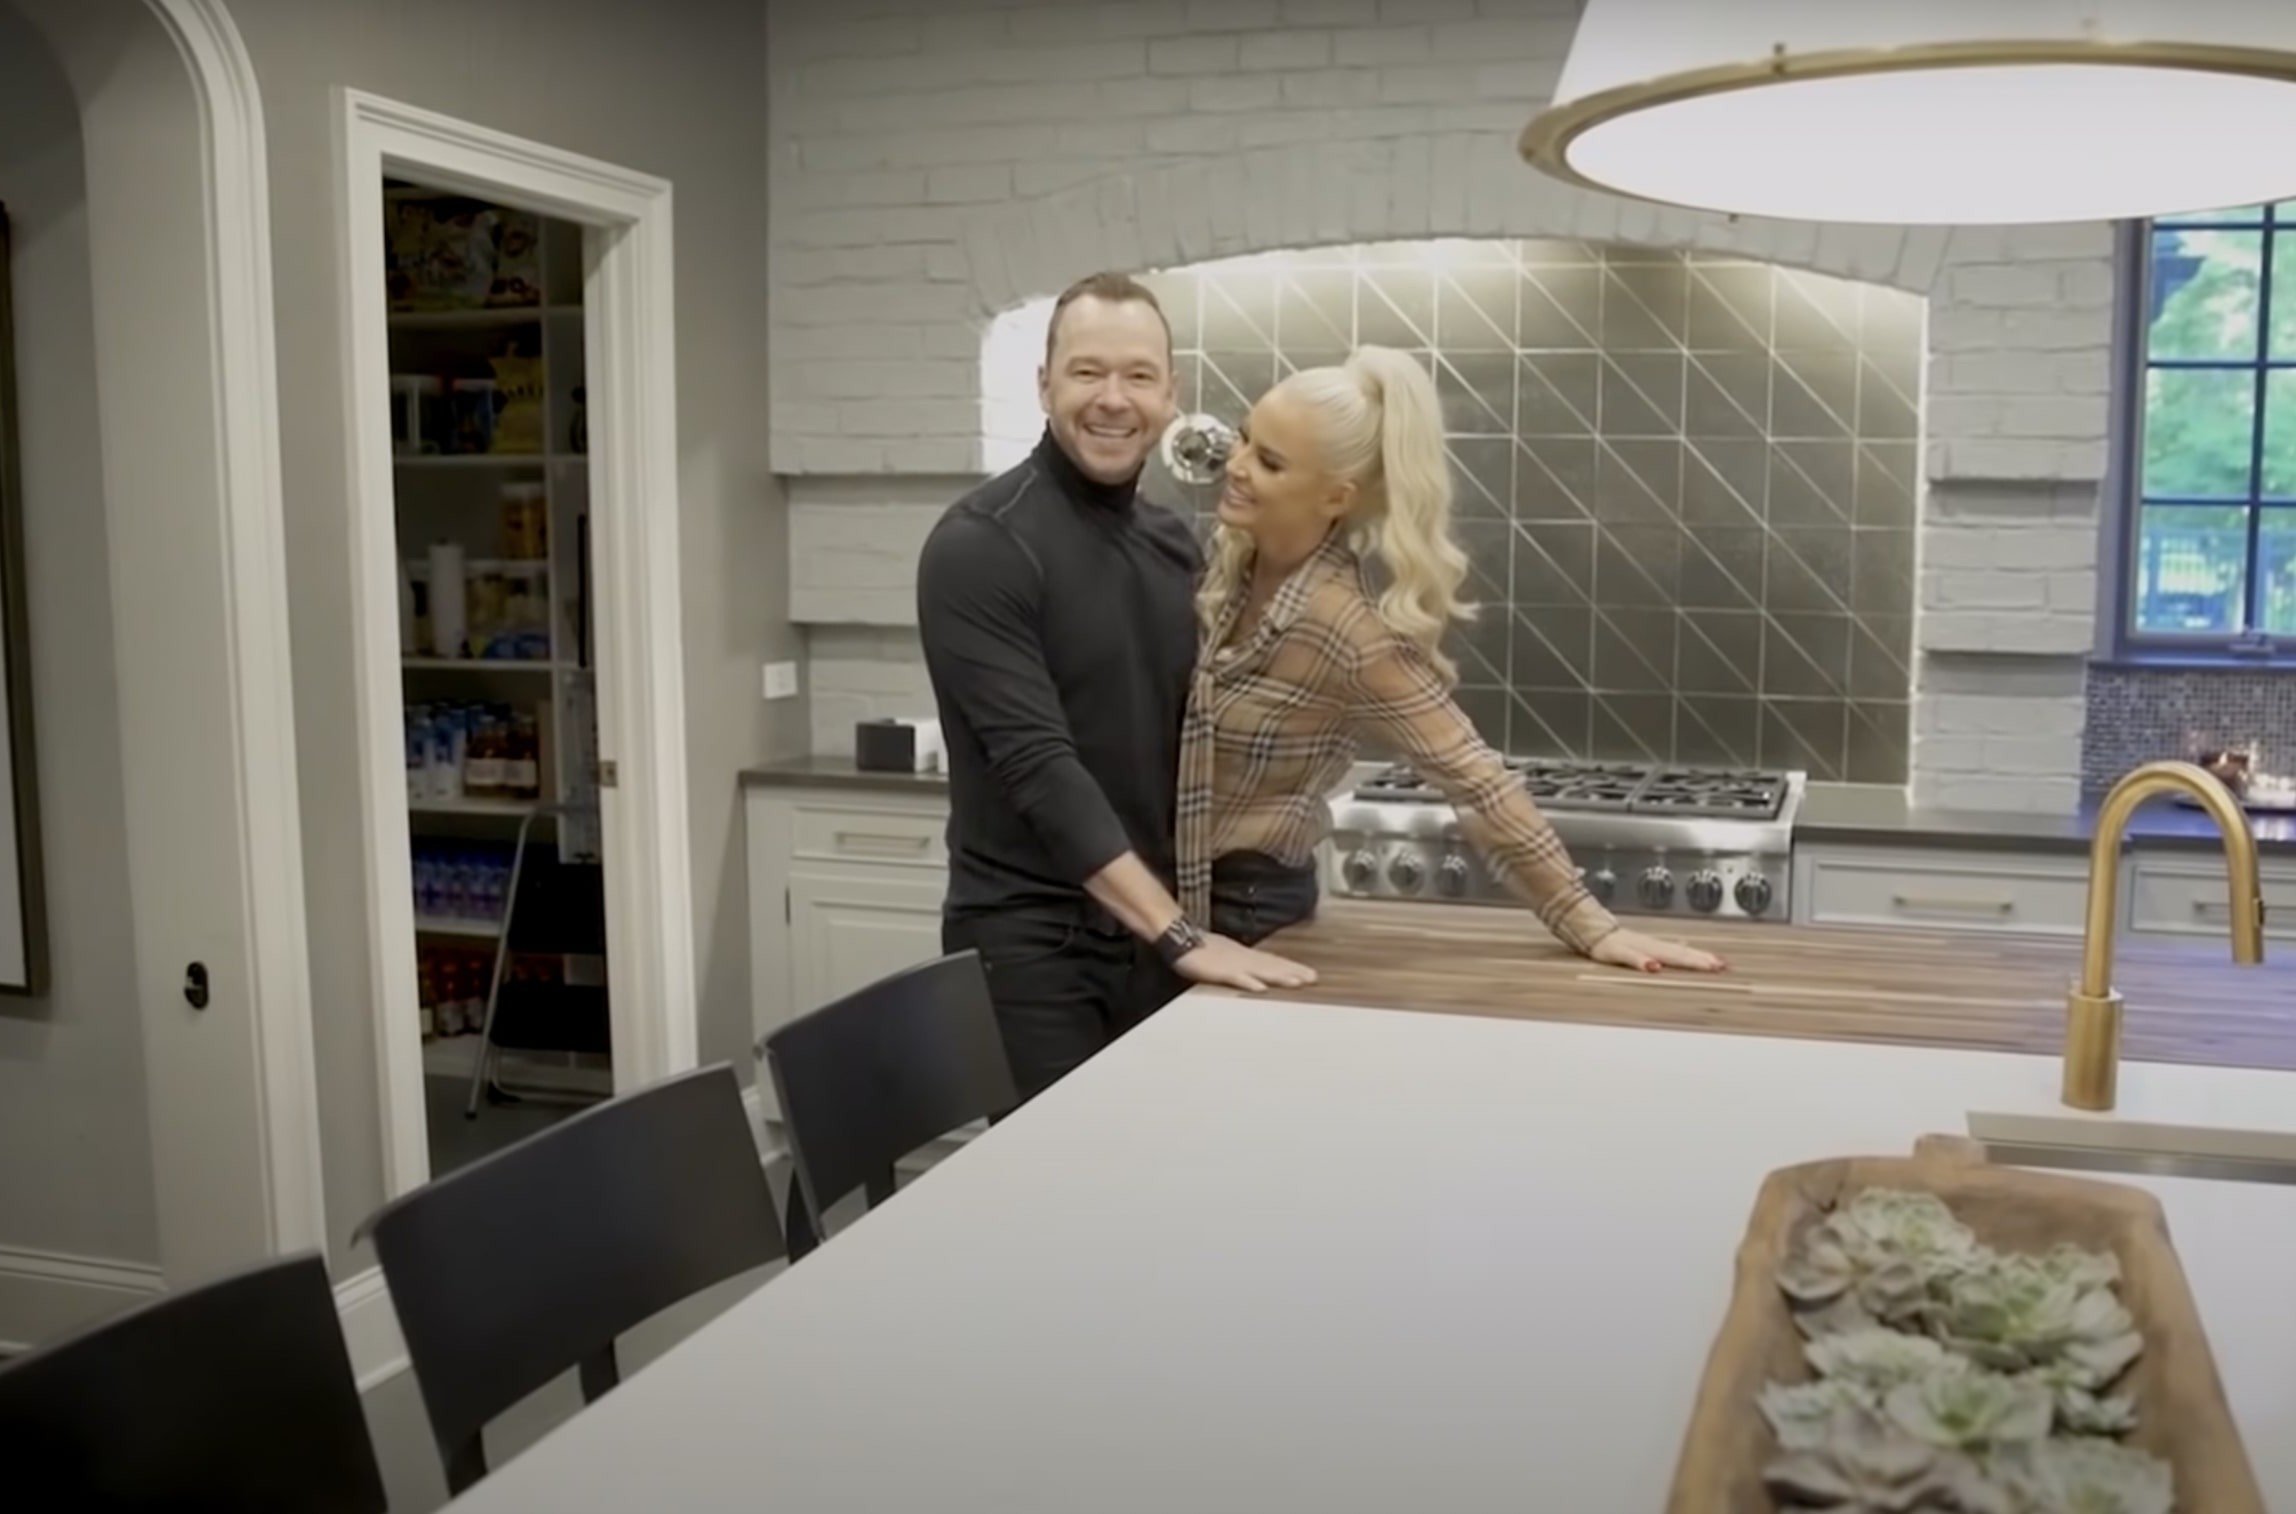 A look inside Jenny McCarthy and Donnie Wahlberg’s kitchen in their Chicago home on October 11, 2019 | Source: YouTube/People